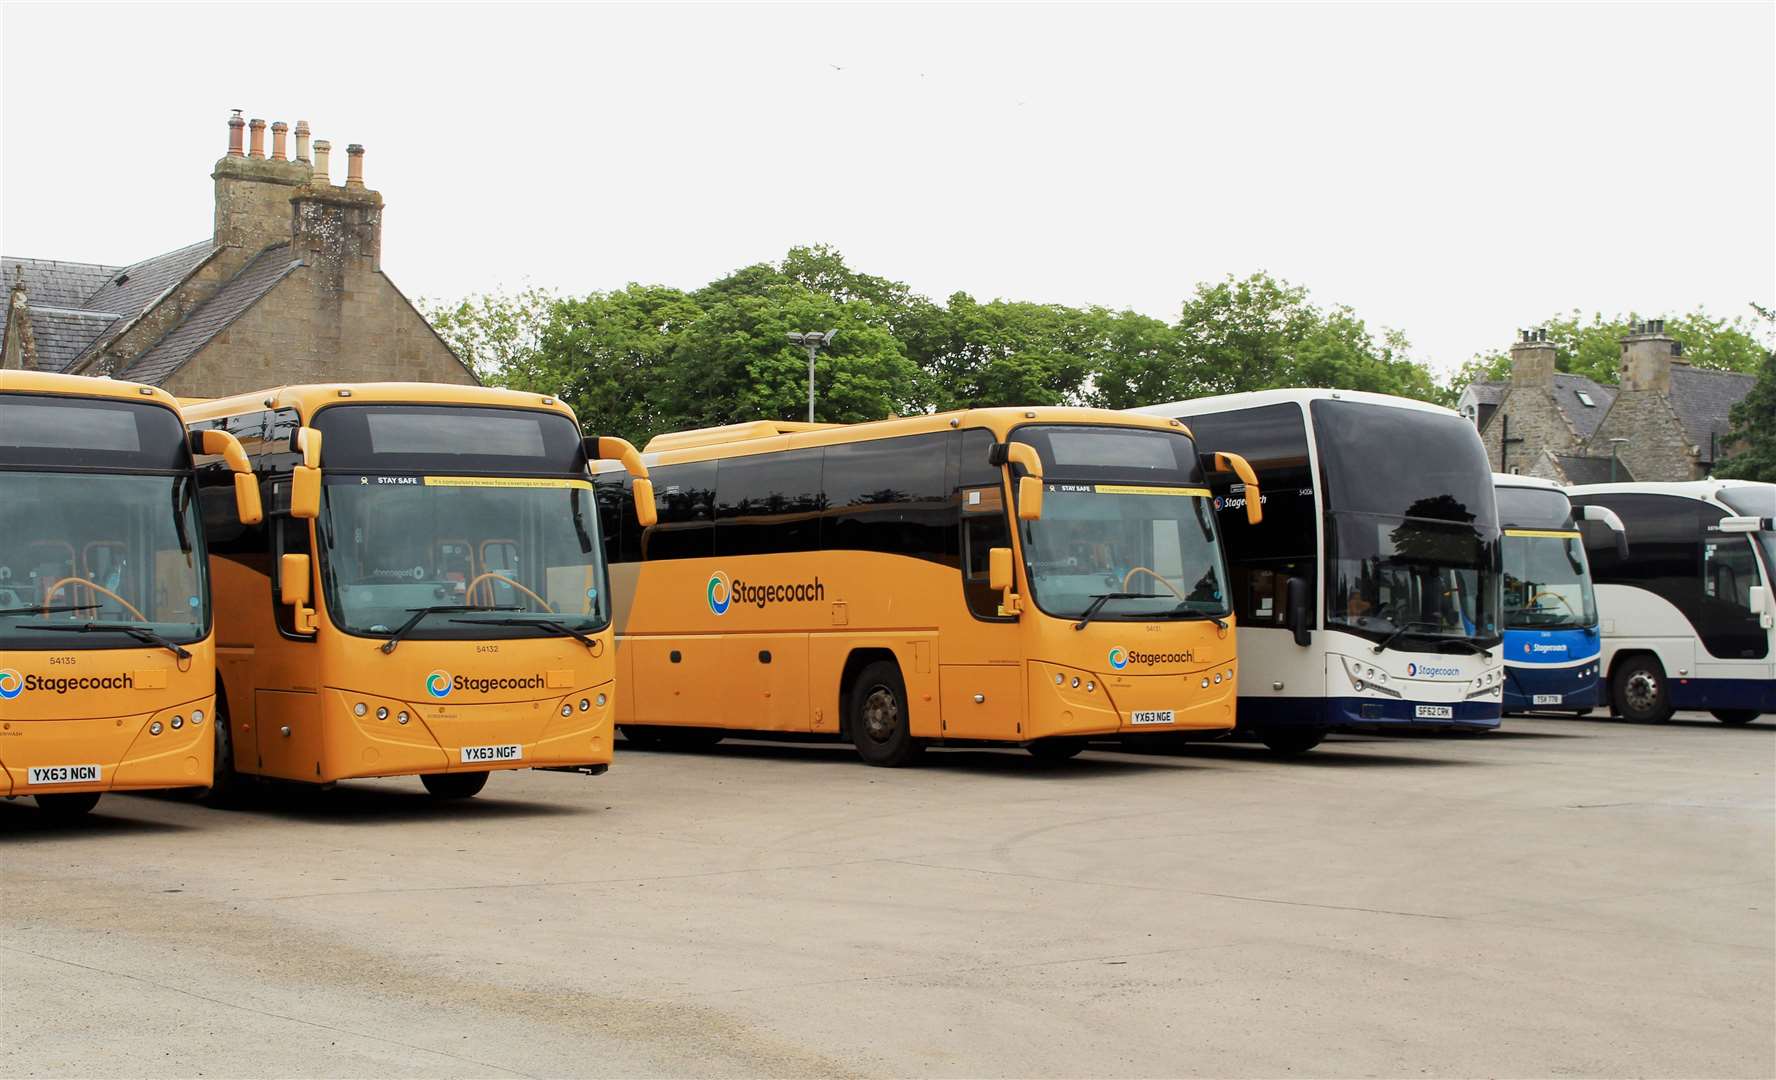 The bus scheme for those aged under 22 has been welcomed by Stagecoach, according to Allan Bruce.